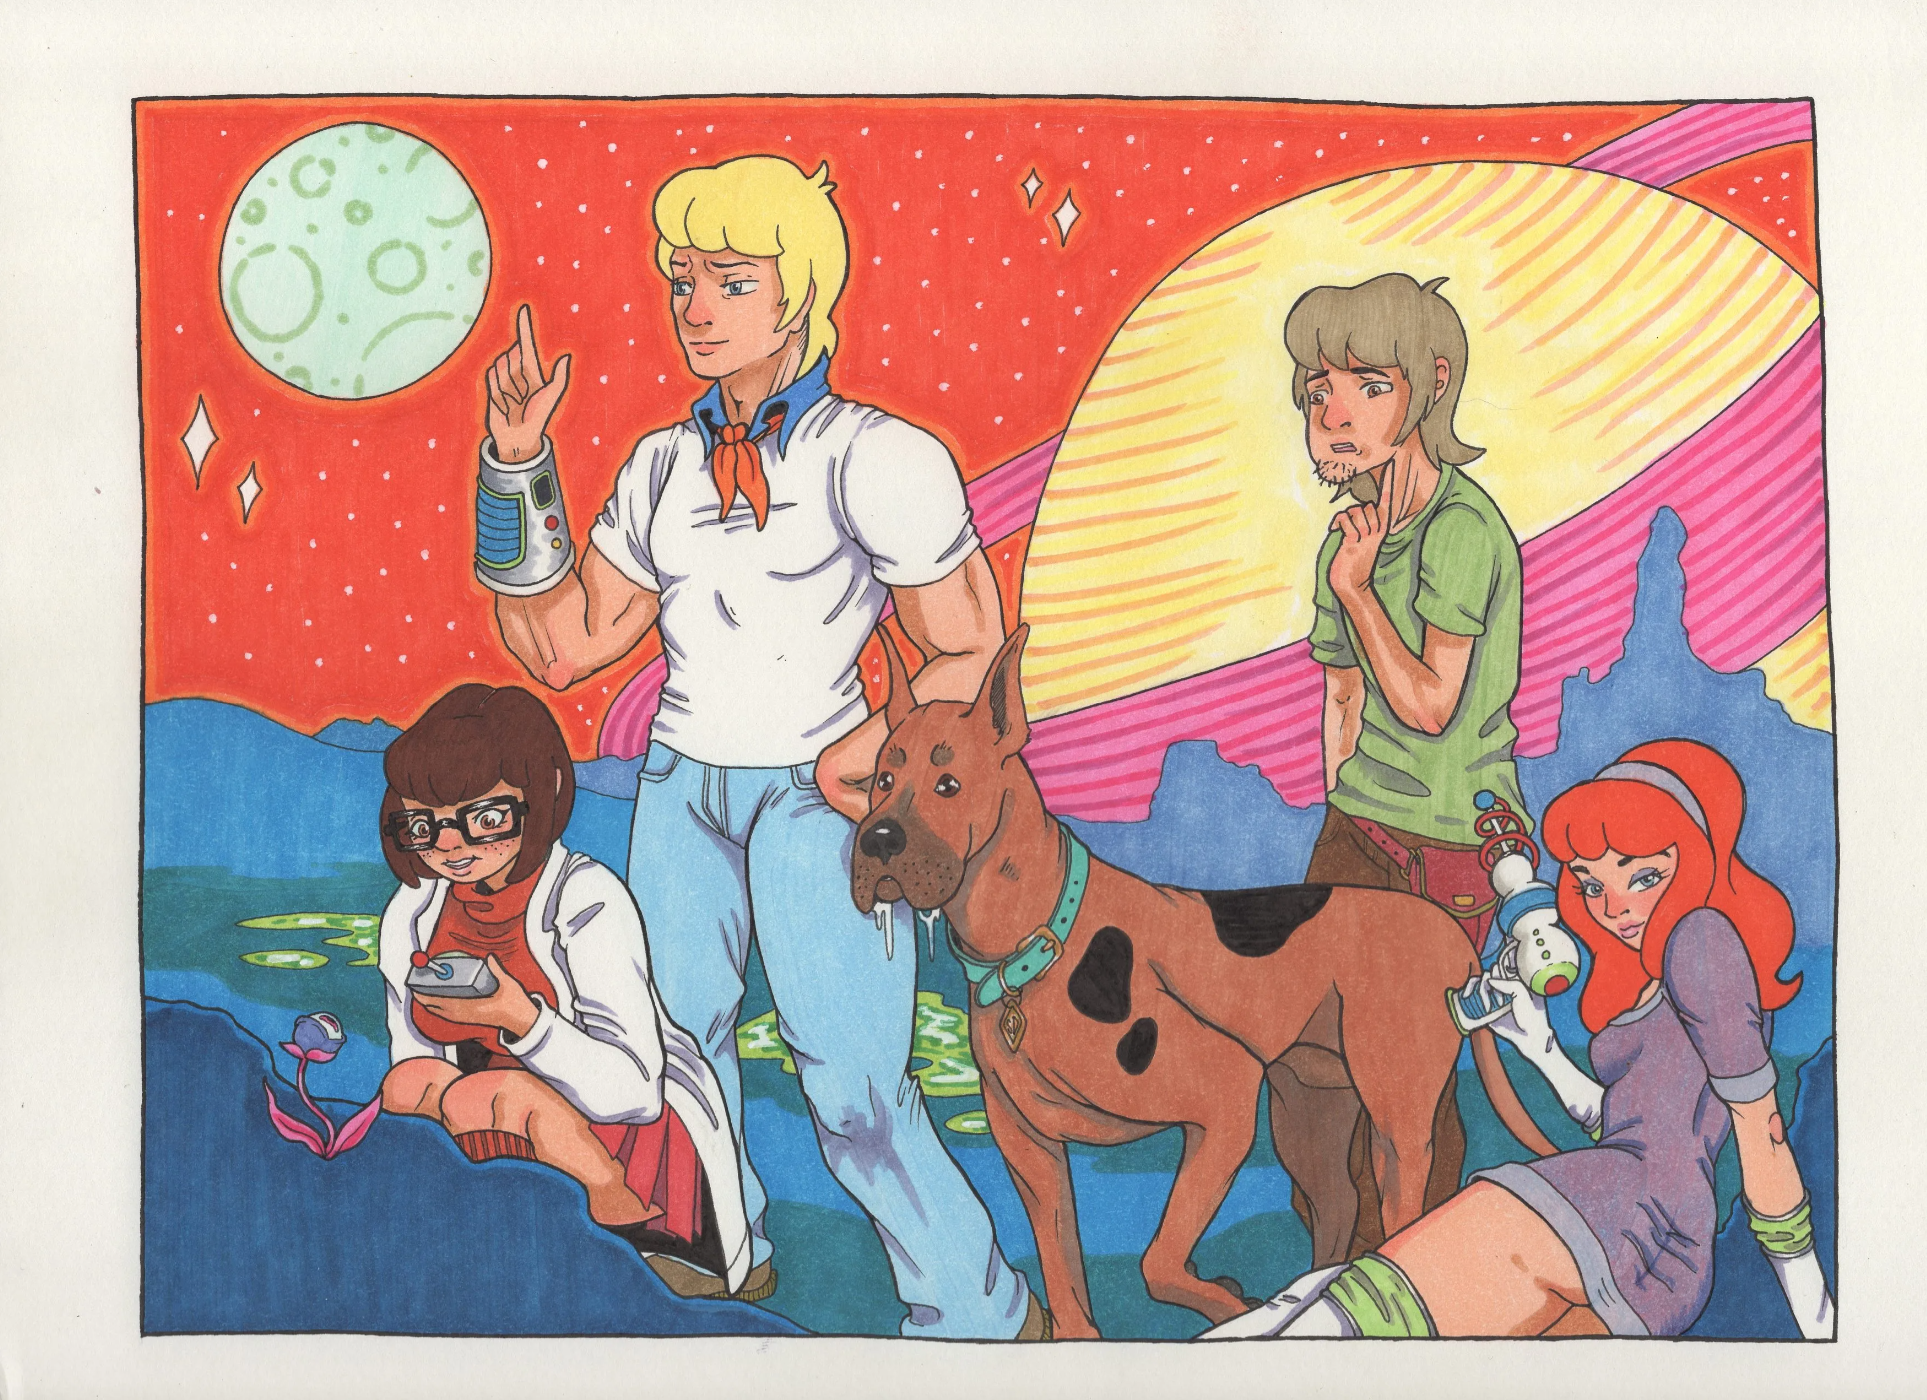 The scooby gang. Velma is looking at an object, Fred is behind her with his hand up, Sccoby is in the middle. Shaggy is behind Scooby looking frightened and Daphne is laying down and looking over her shoulder.